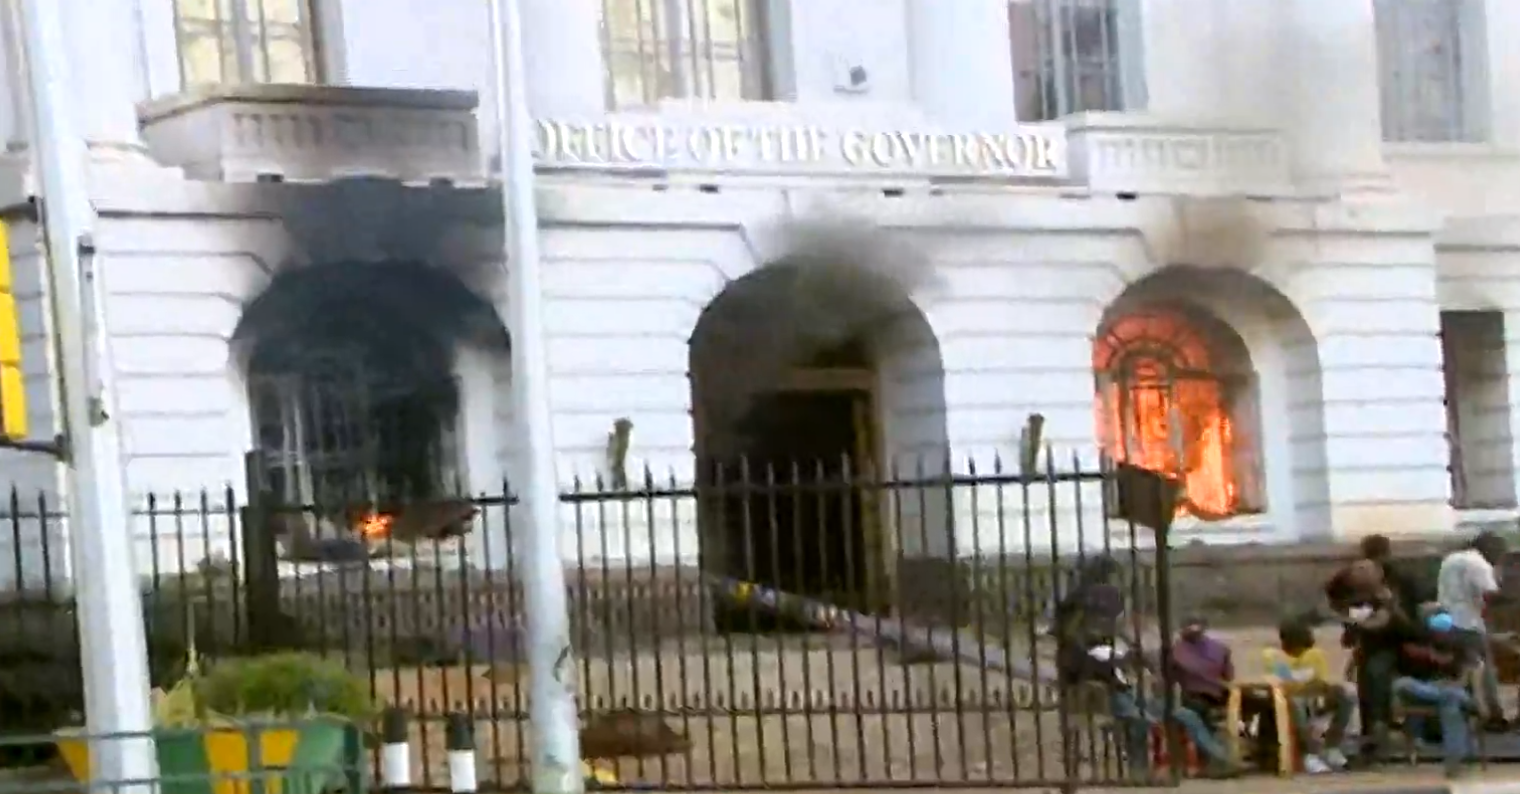 Sakaja: “One of the goons who burnt City Hall works at an MPs office”